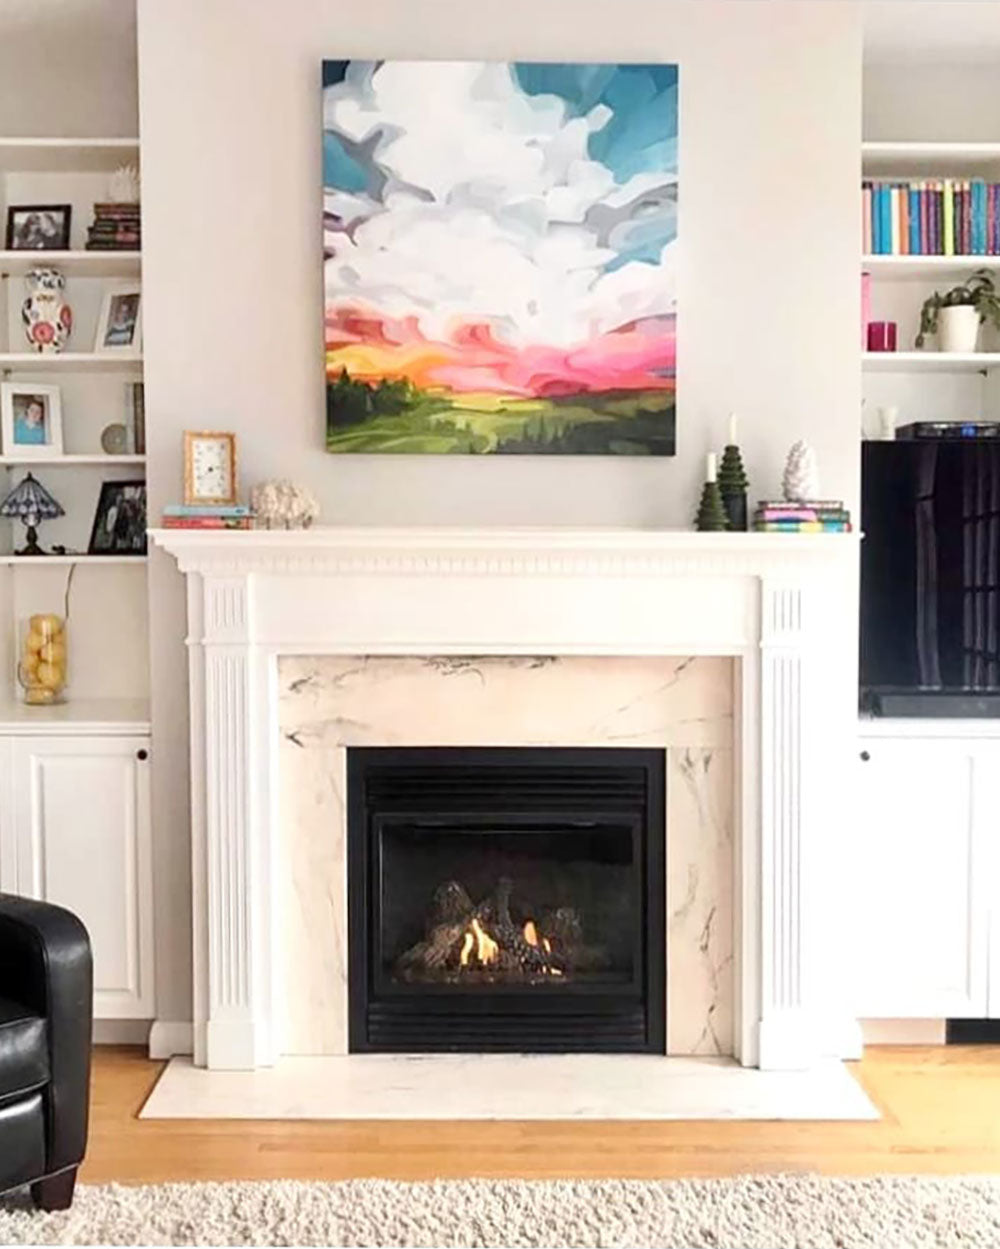 bright sunrise painting over fireplace